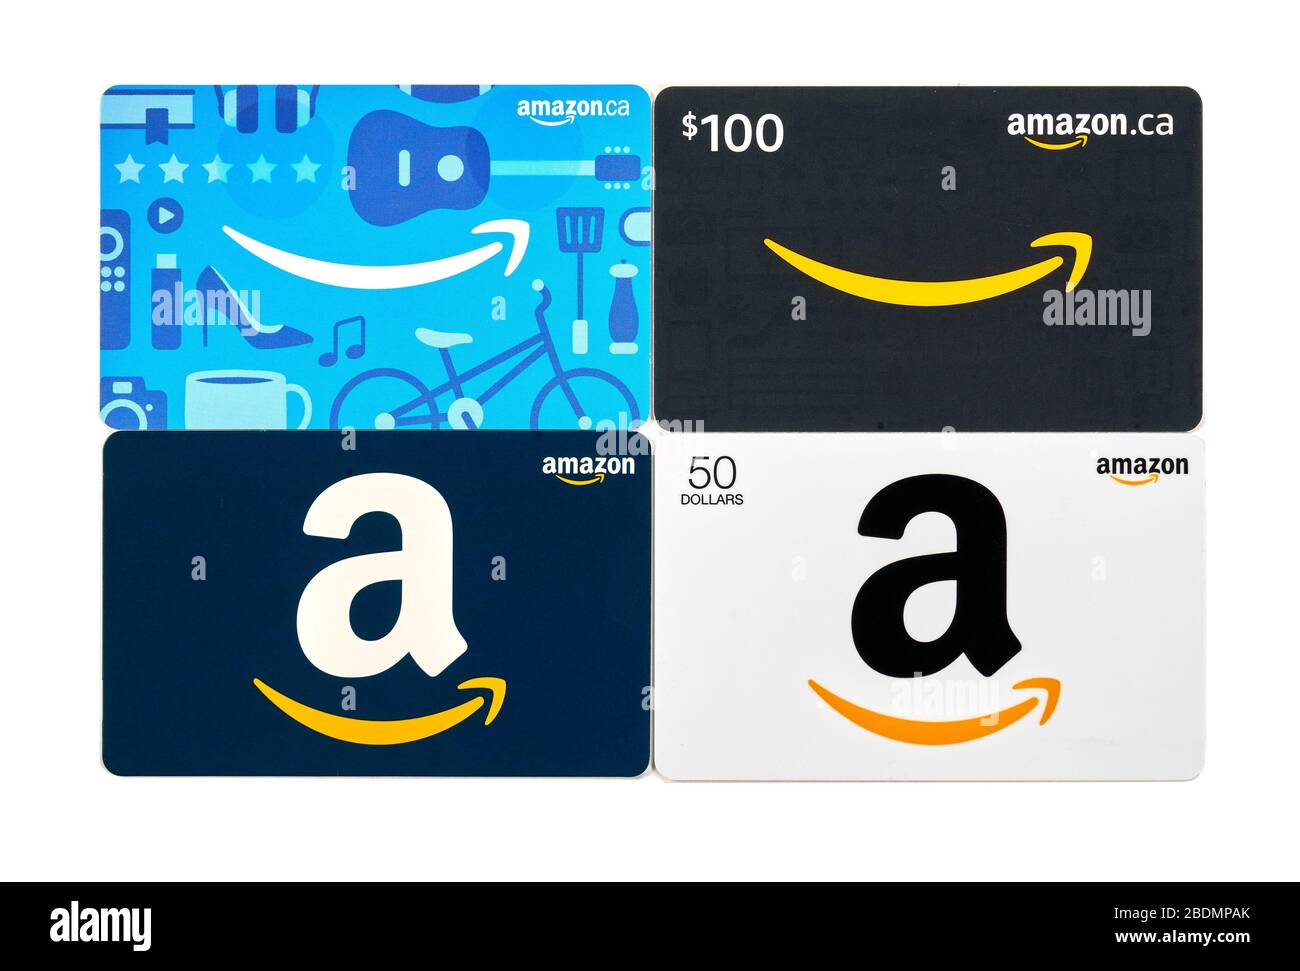 Montreal, Canada - April 6, 2020: Amazon gift cards. Amazon is a titan of e-commerce, logistics, payments, hardware, data storage, cloud computing, an Stock Photo